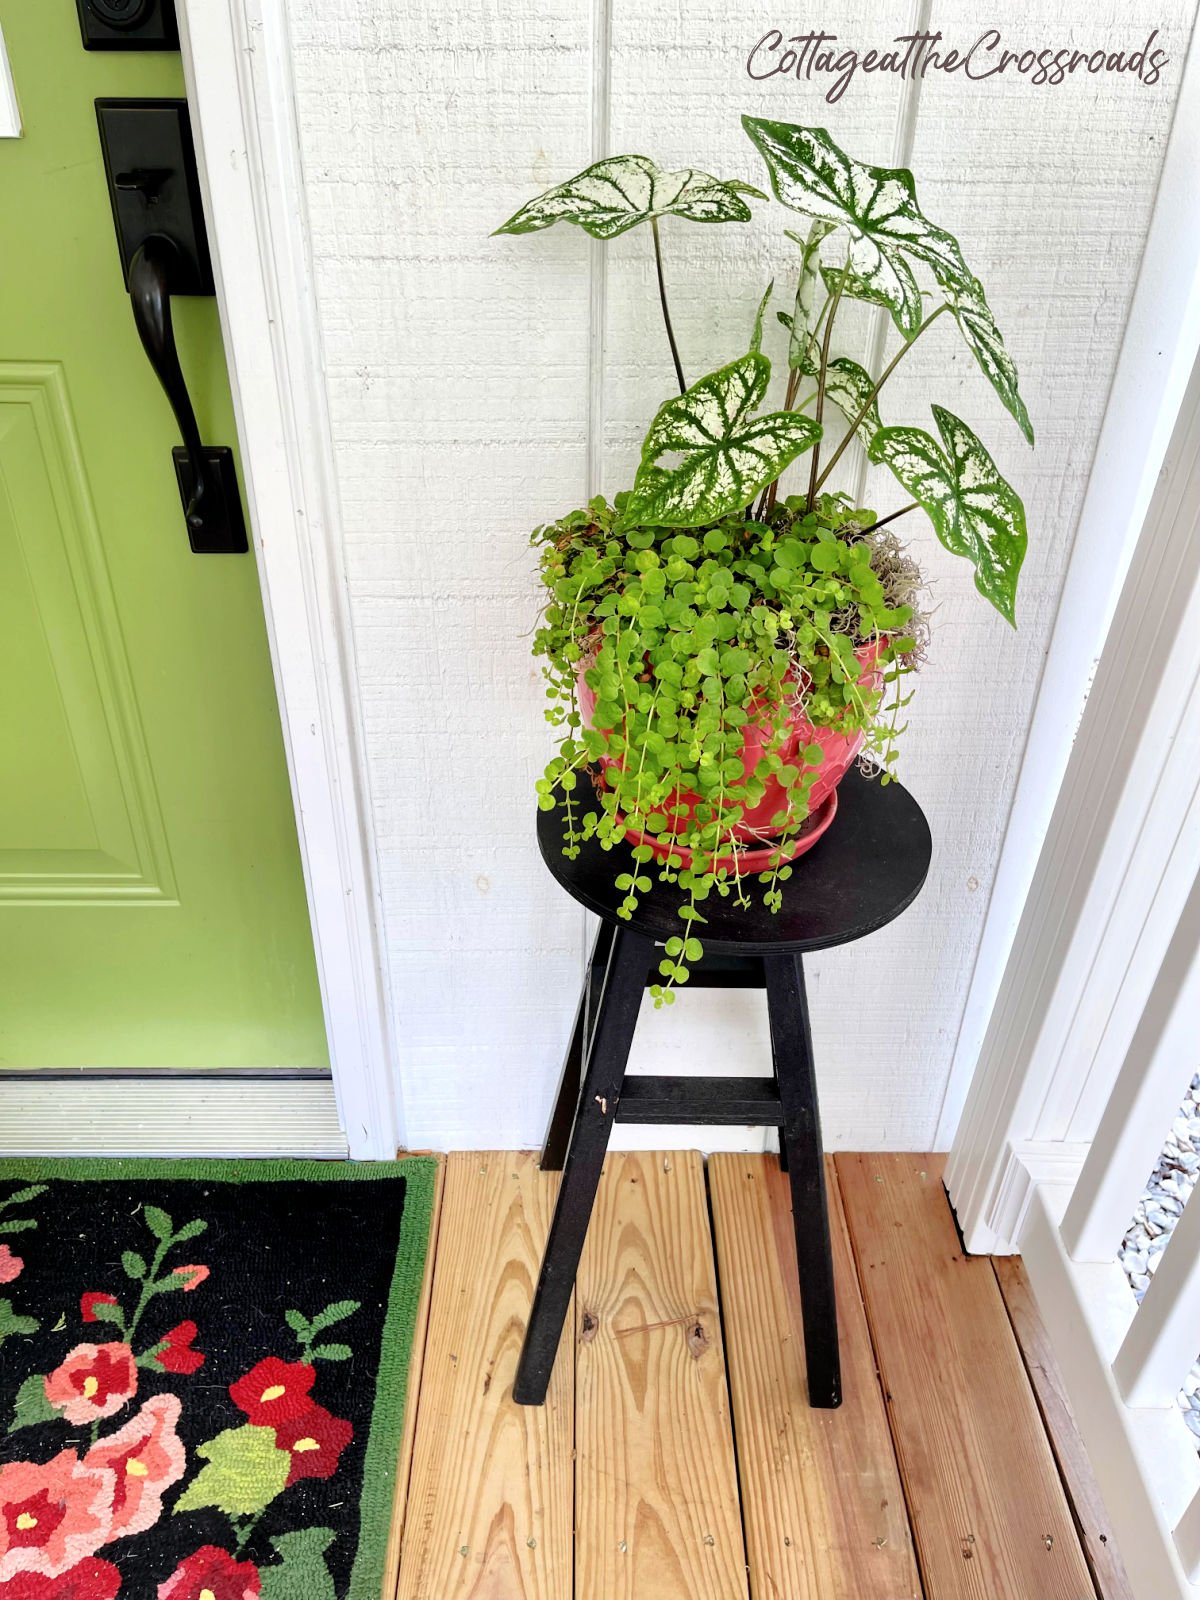 White caladiums and creeping jenny in a planter on a stool